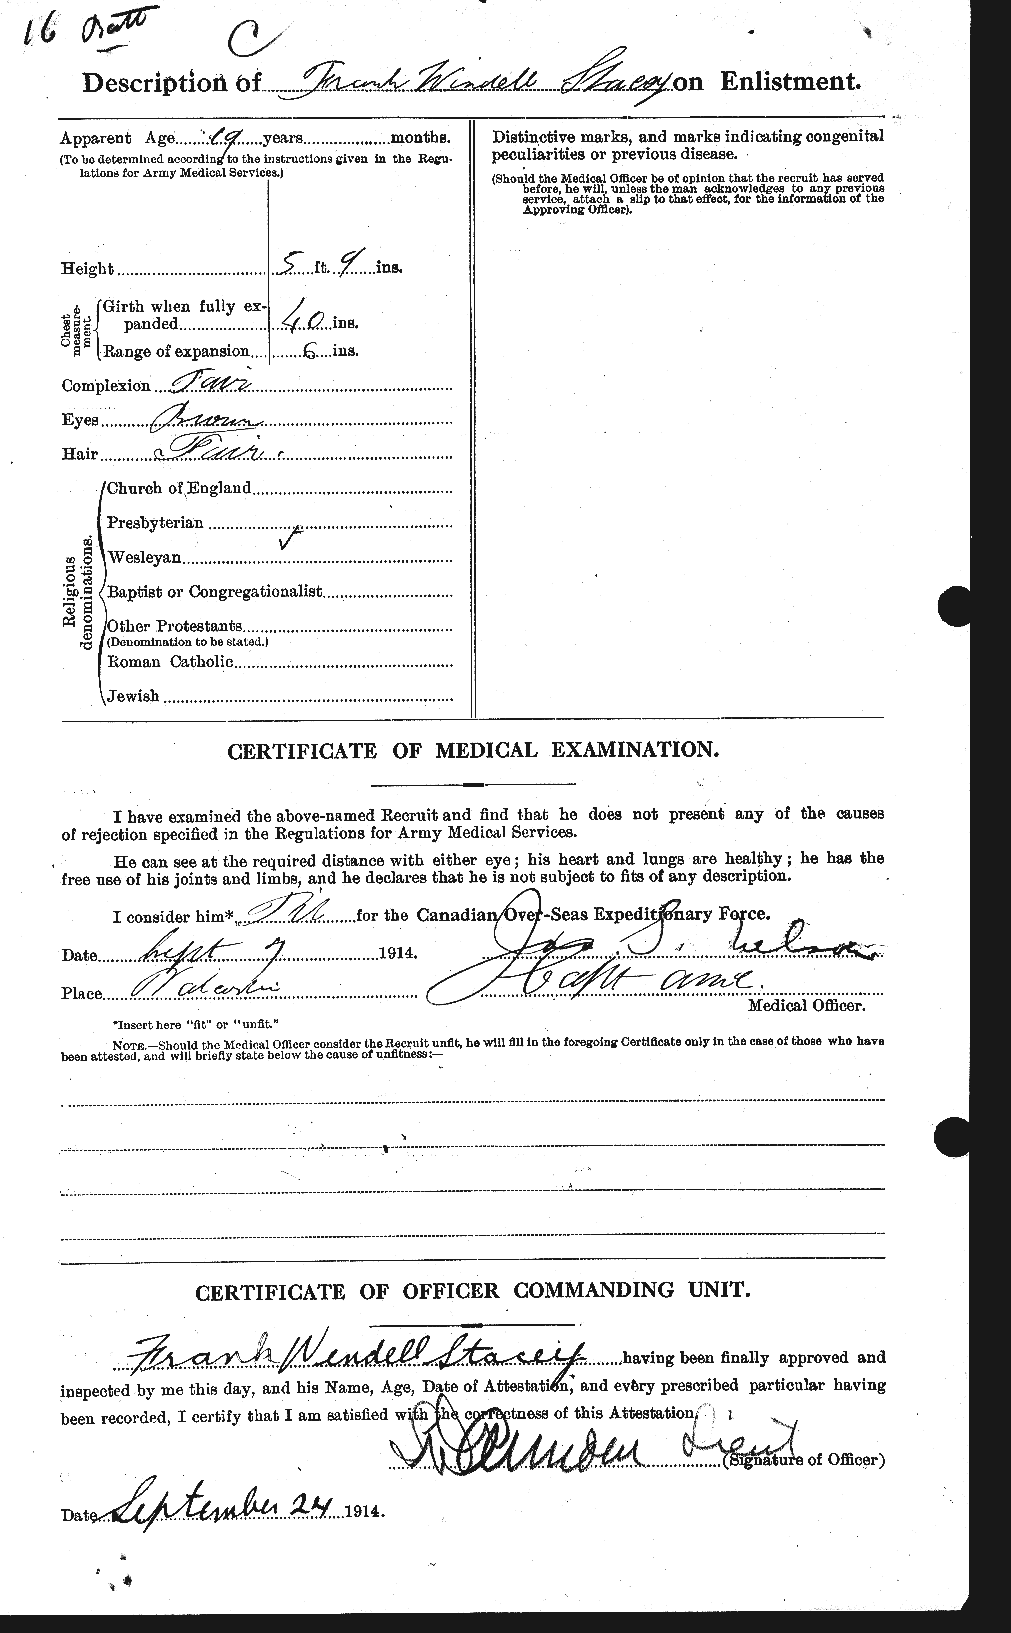 Personnel Records of the First World War - CEF 113770b